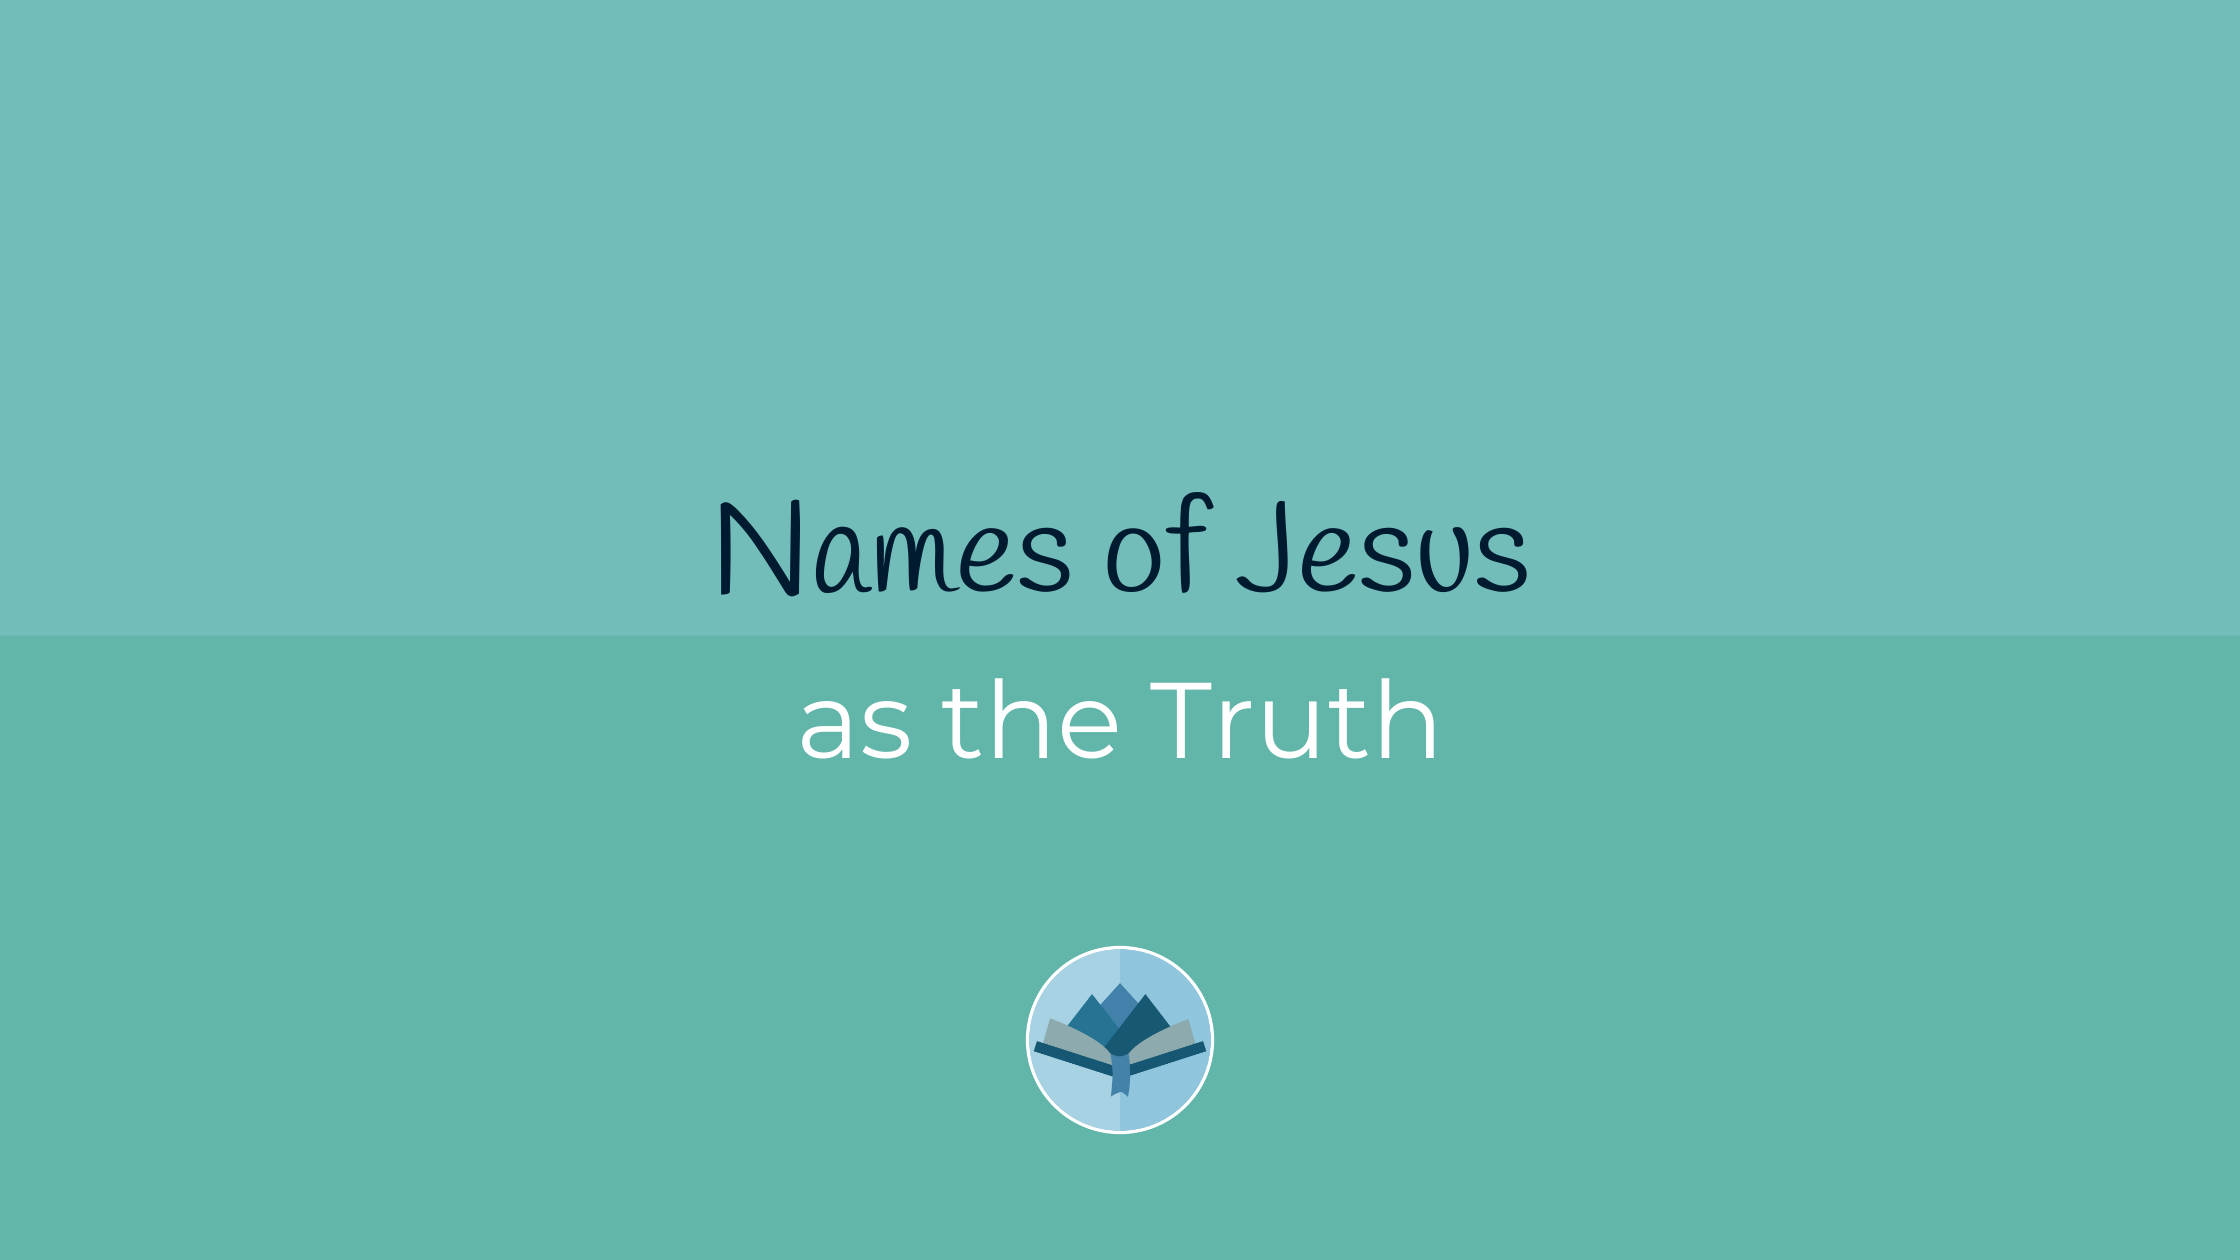 Names of Jesus as the Truth